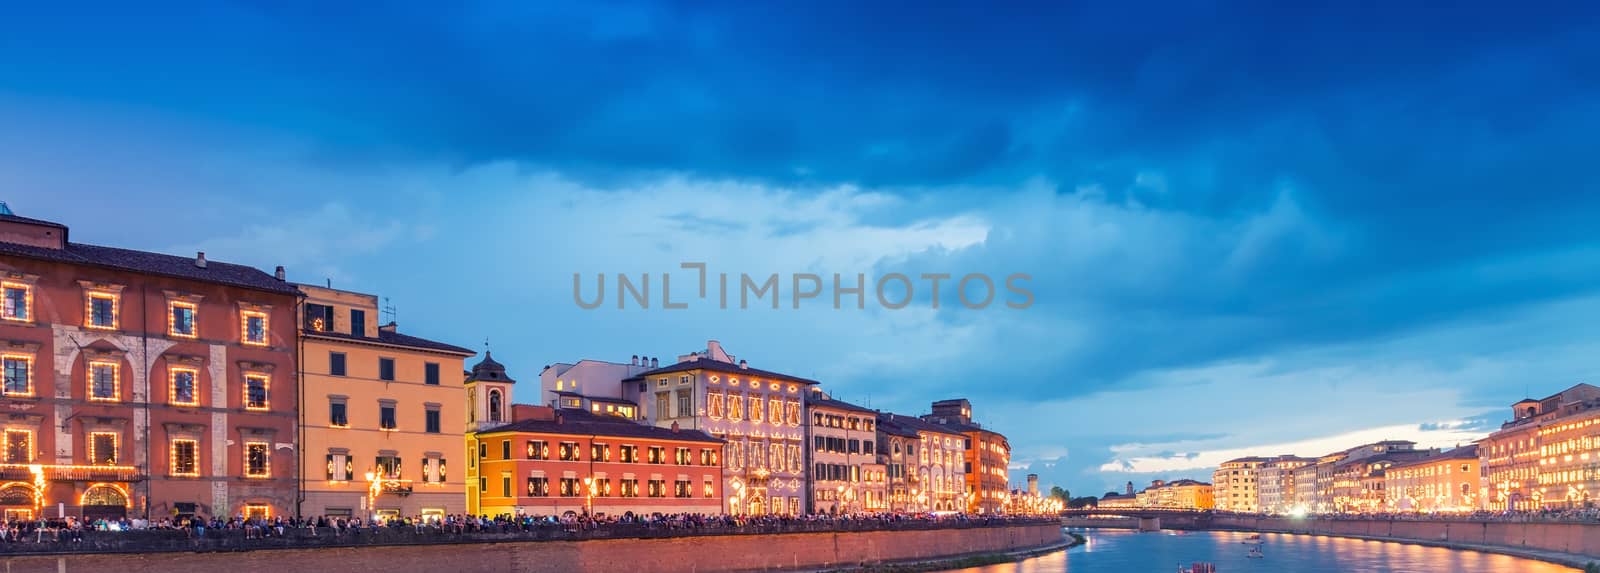 Pisa, Italy. Lungarno Gambacorti and Pacinotti at night during L by jovannig